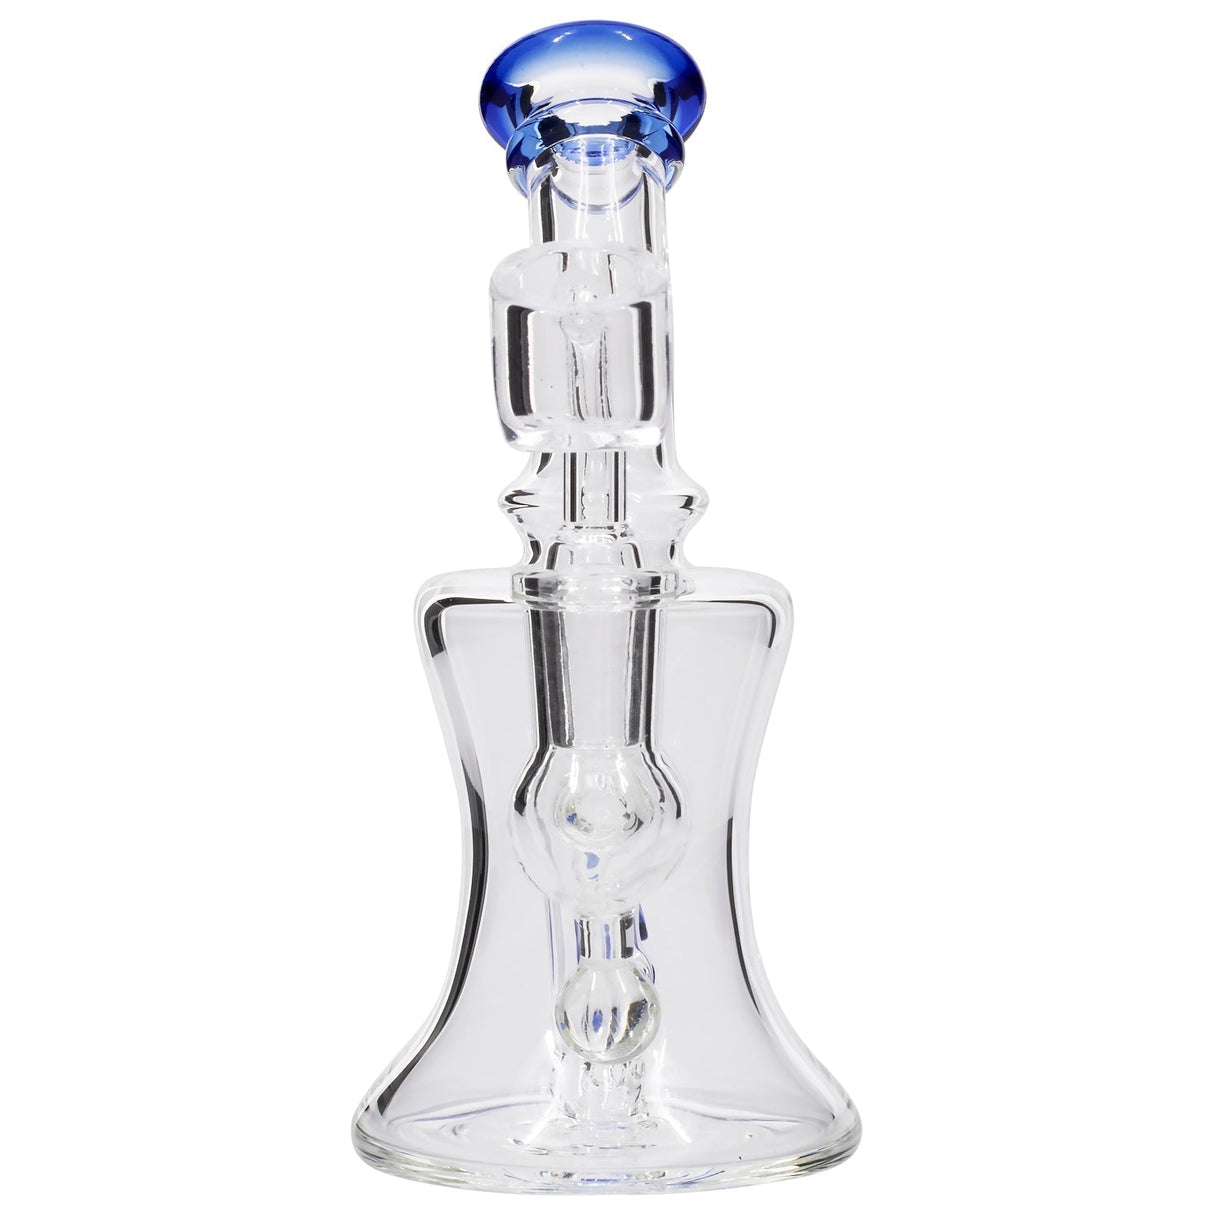 Glassic Marble-Studded Dab Rig with Blue Accents, Compact Design, Front View on White Background